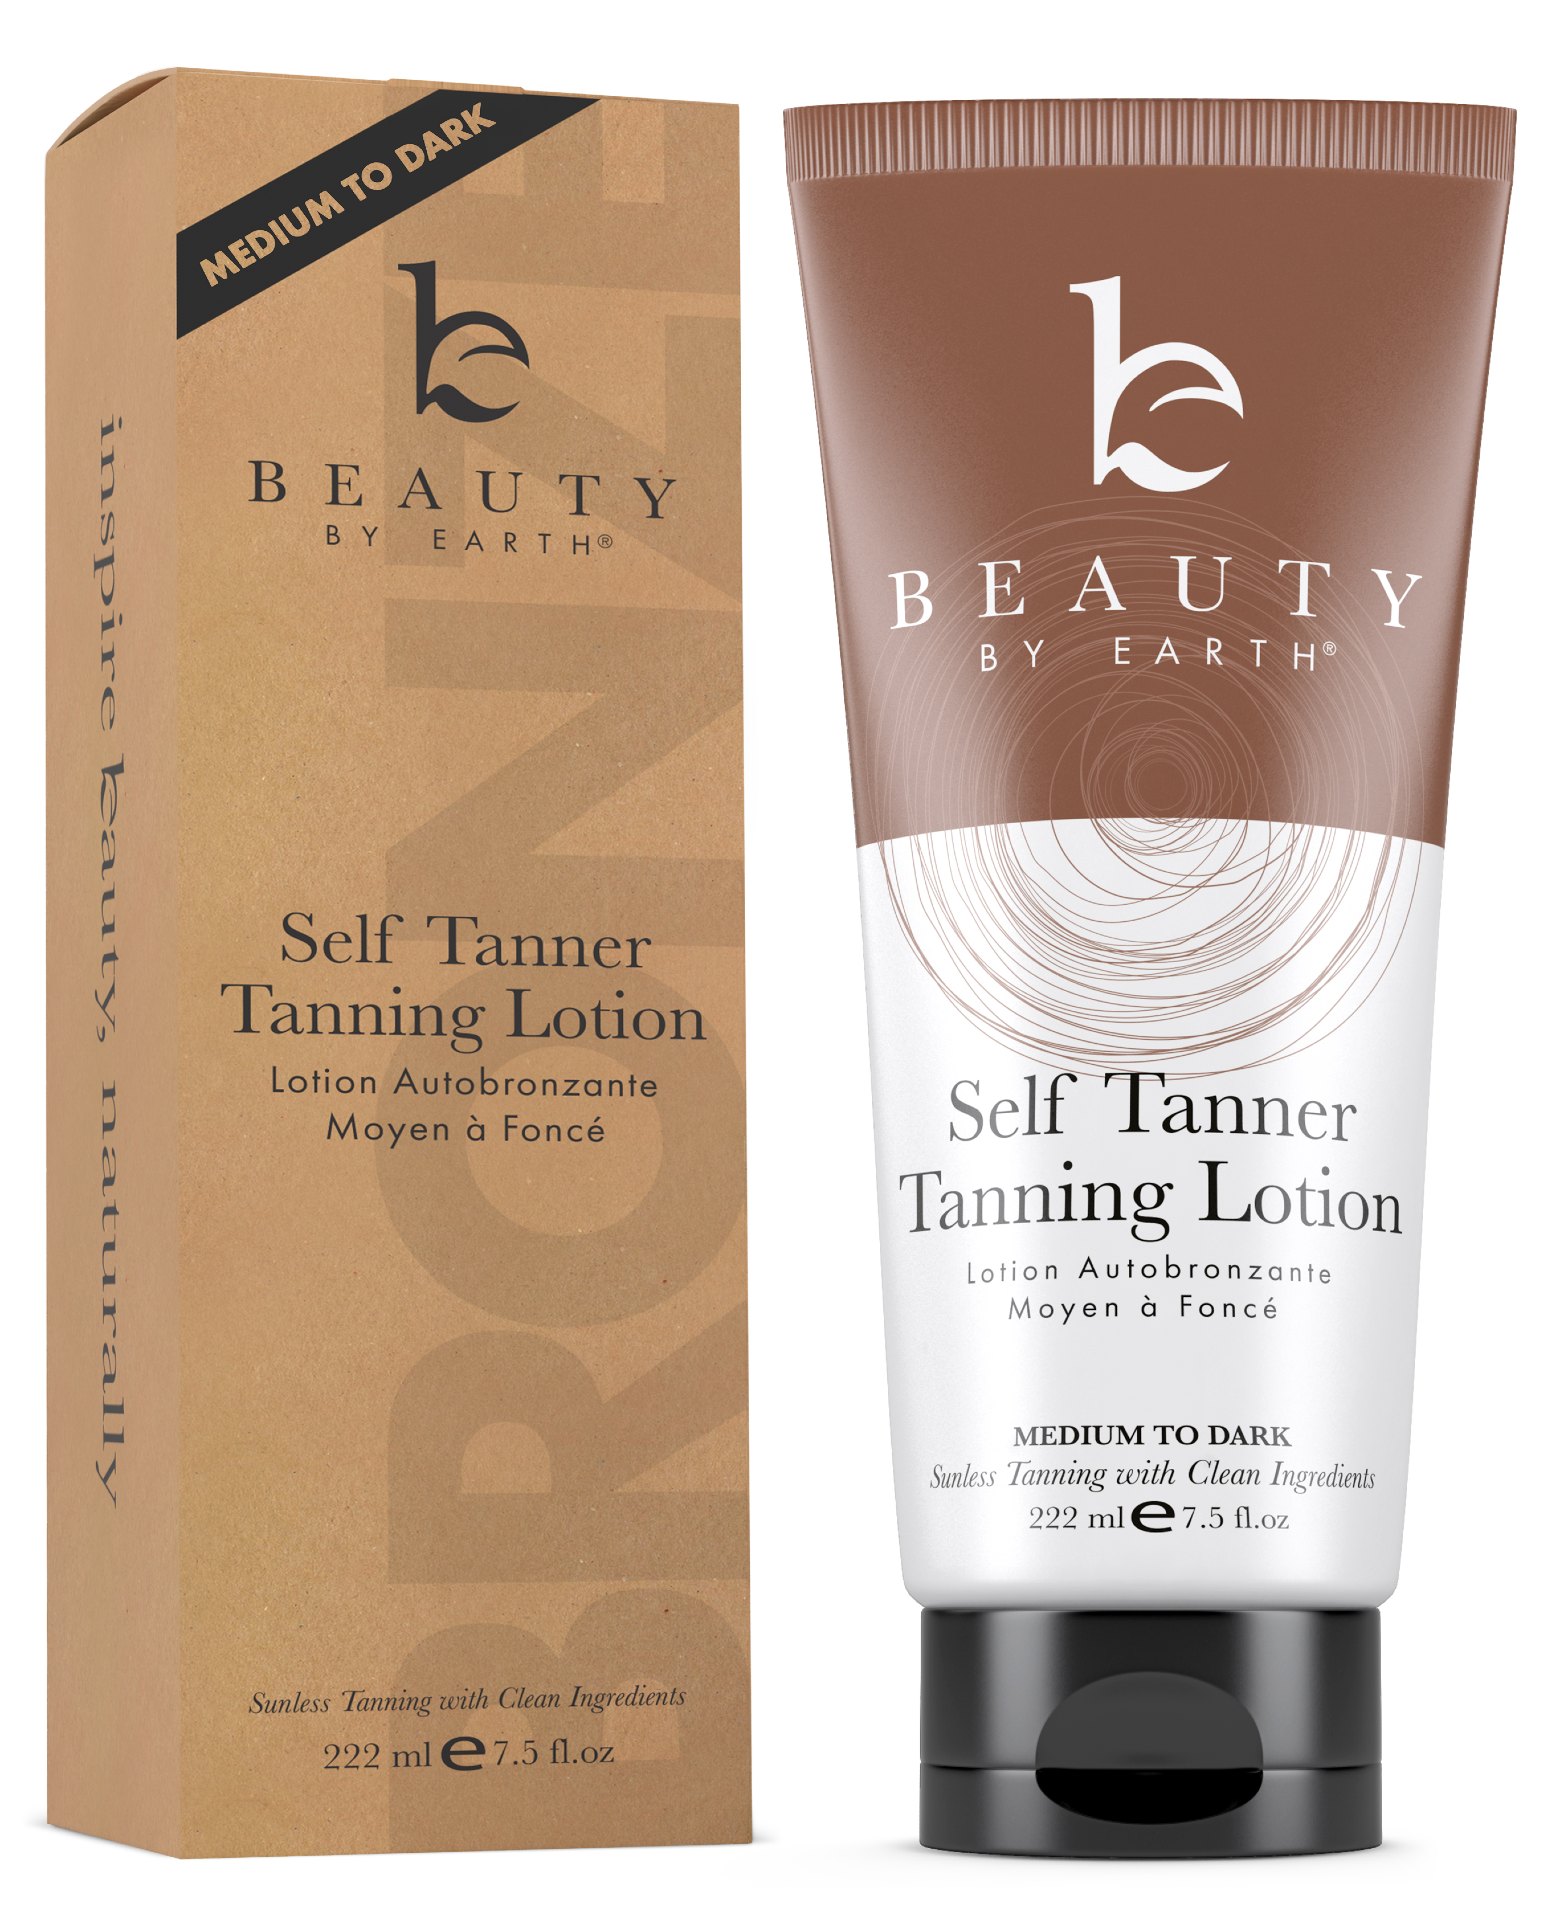 Beauty by Earth Self Tanner - Made with Organic Aloe Vera & Shea Butter, Sunless Tanning Lotion and Bronzer Buildable Light, Medium or Dark for Natural Looking Fake Tan, 1 Pack - image 1 of 6